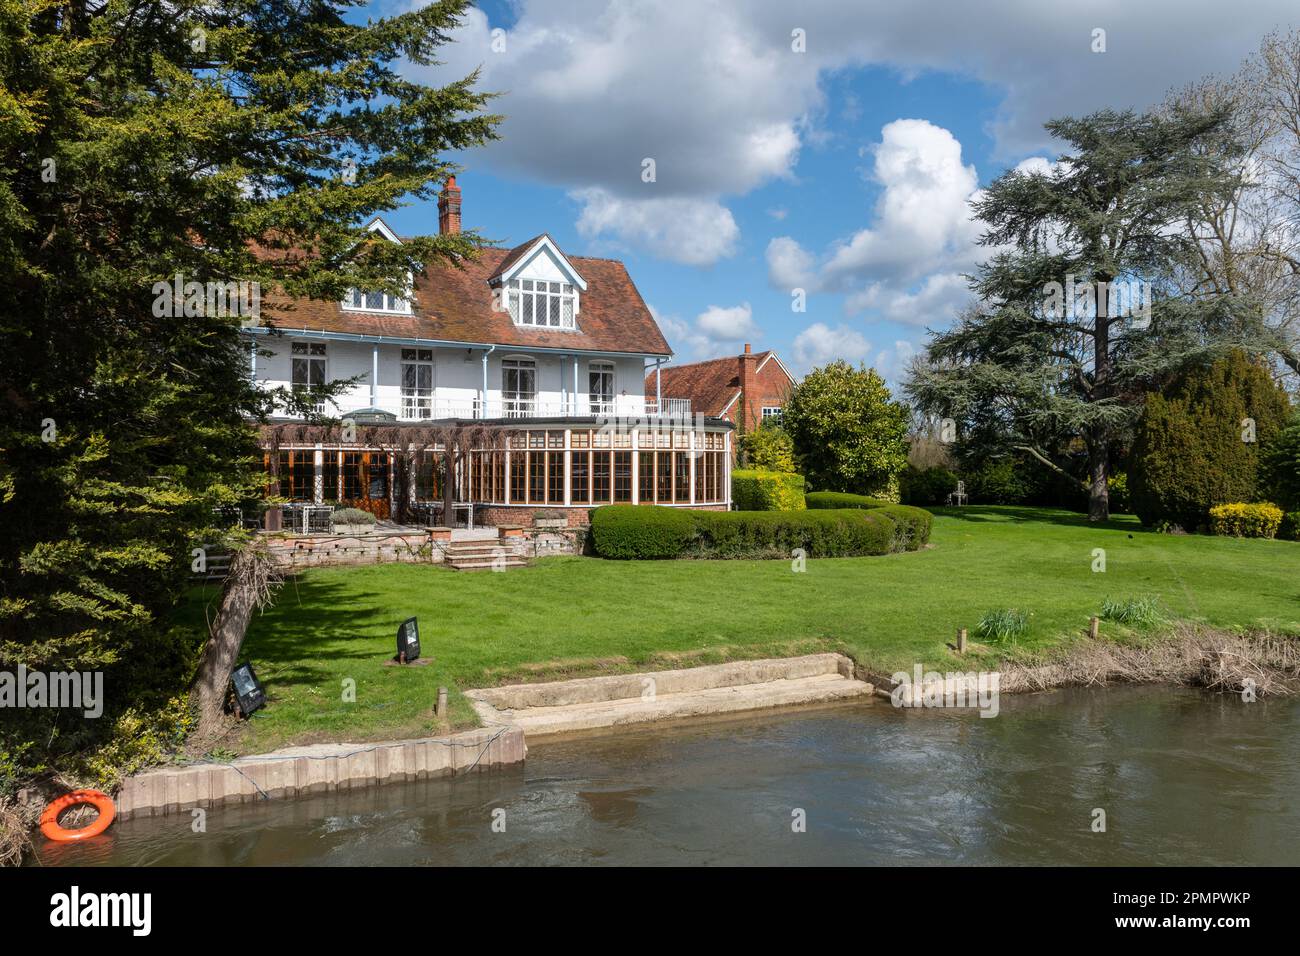 The French Horn pub restaurant and hotel beside the River Thames at Sonning near Reading, Berkshire, England, UK Stock Photo